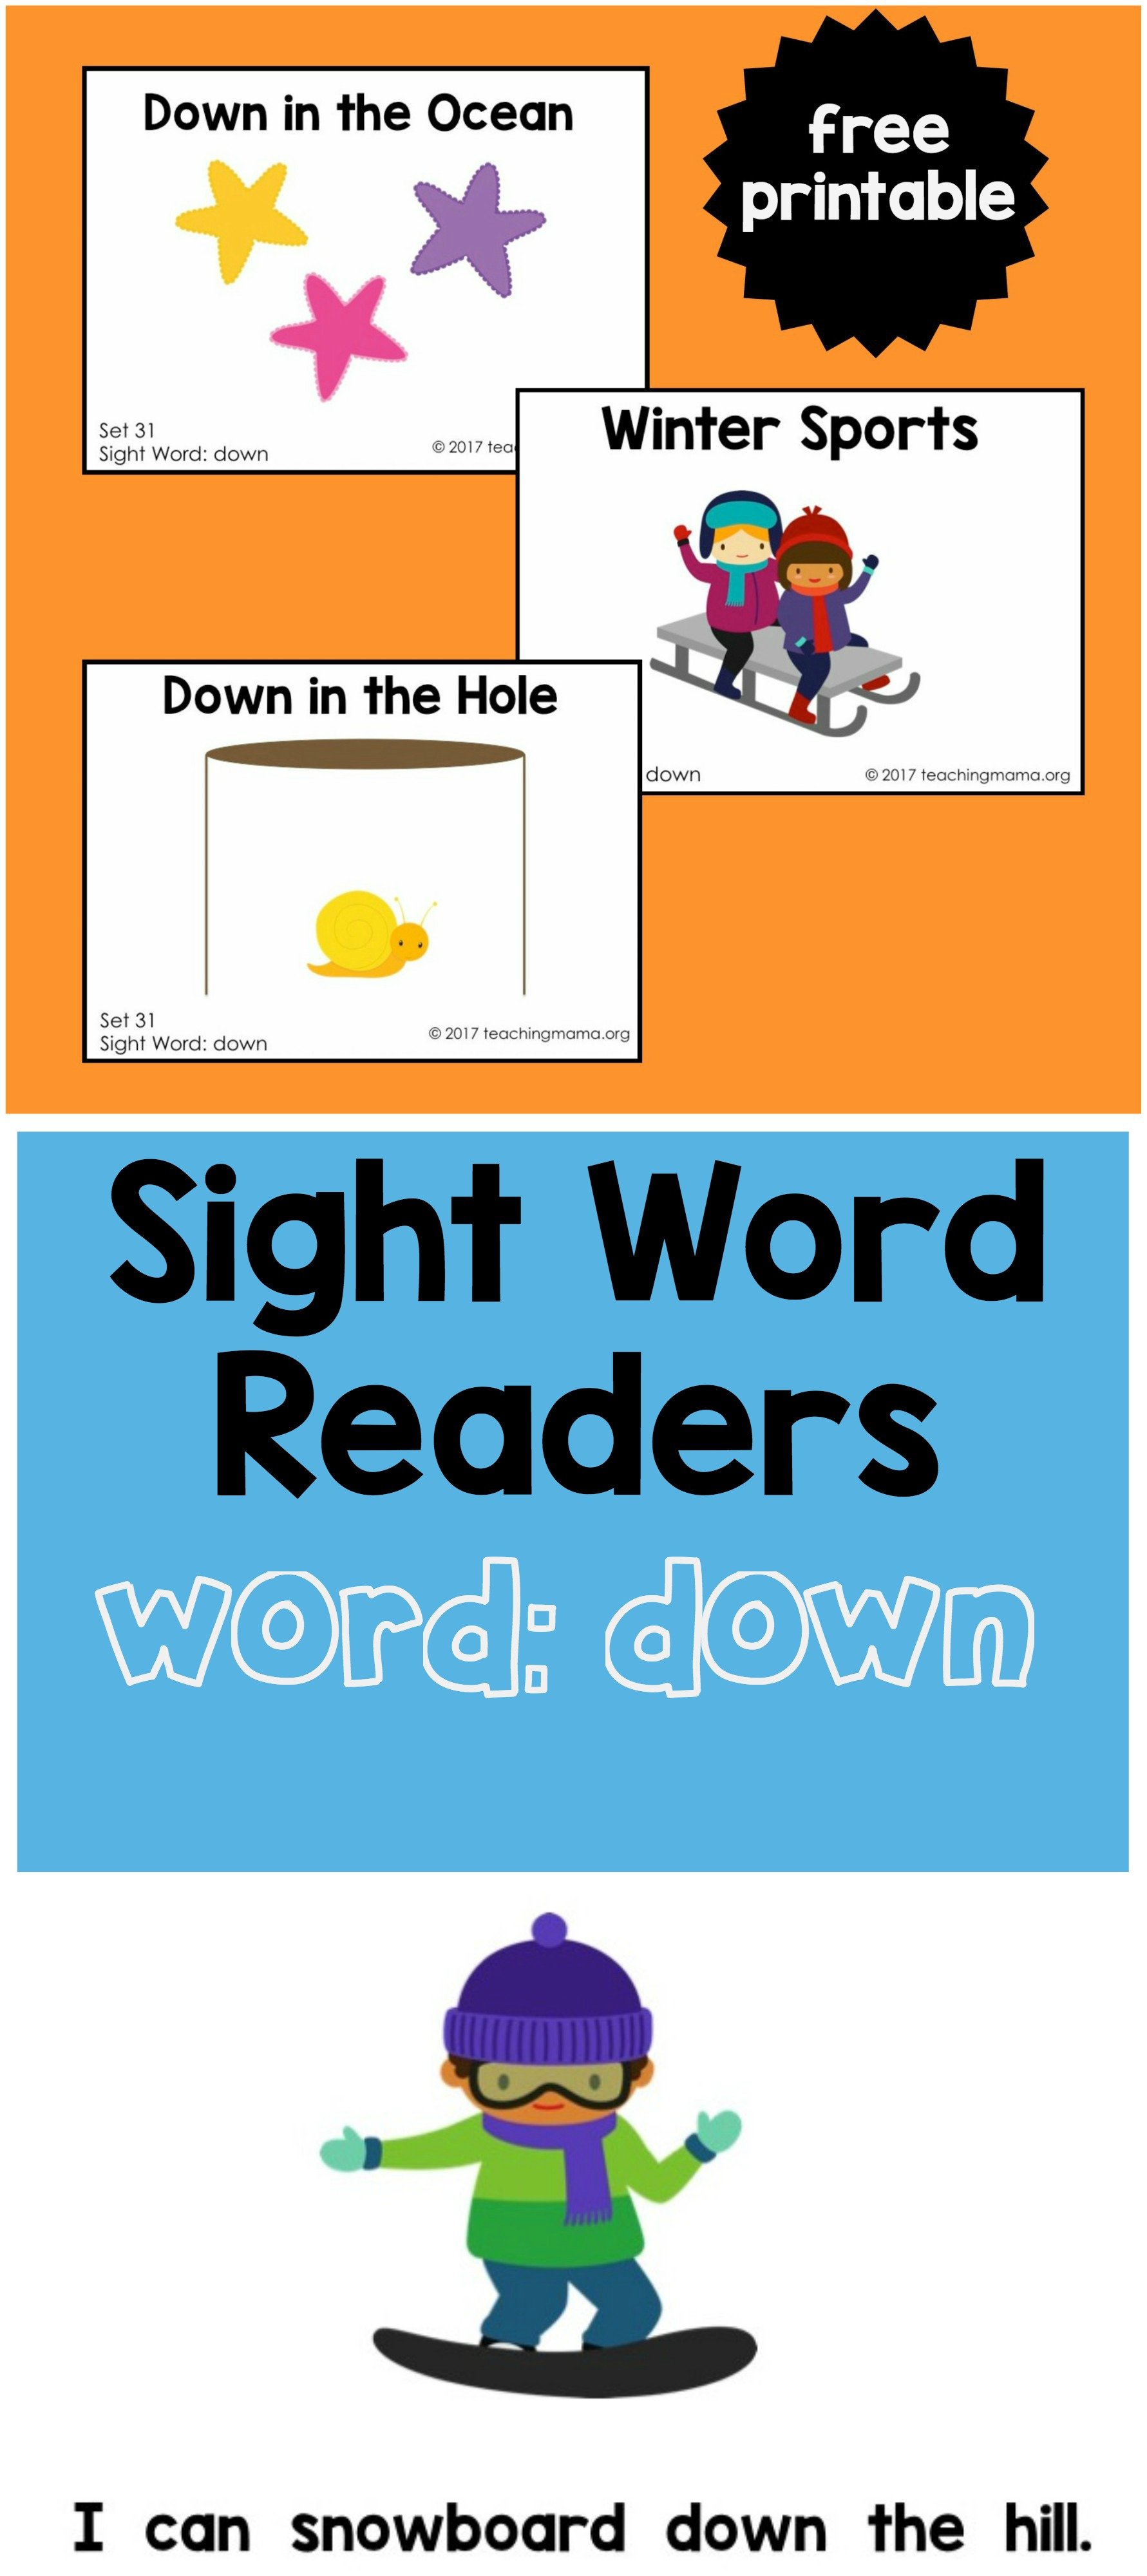 HOW TO USE WORDS THAT CATCH THE READER'S HOW TO USE WORDS THAT CATCH THE  READER'S. - ppt download